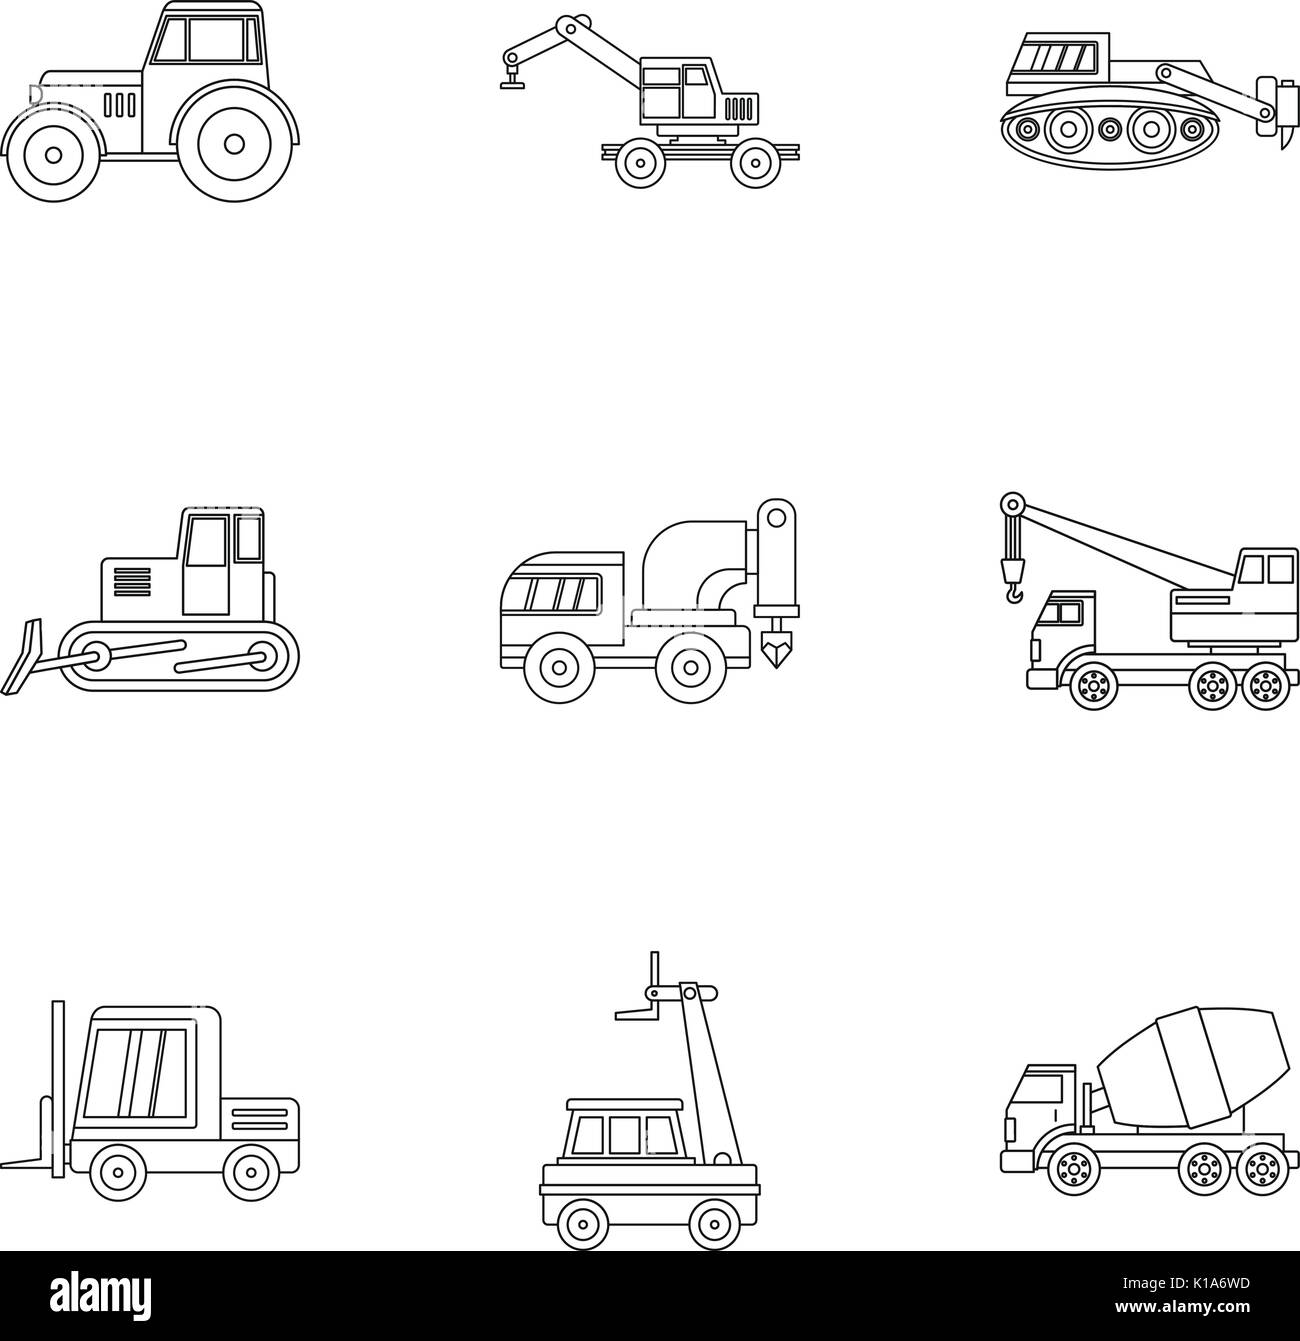 Building vehicle icon set, outline style Stock Vector